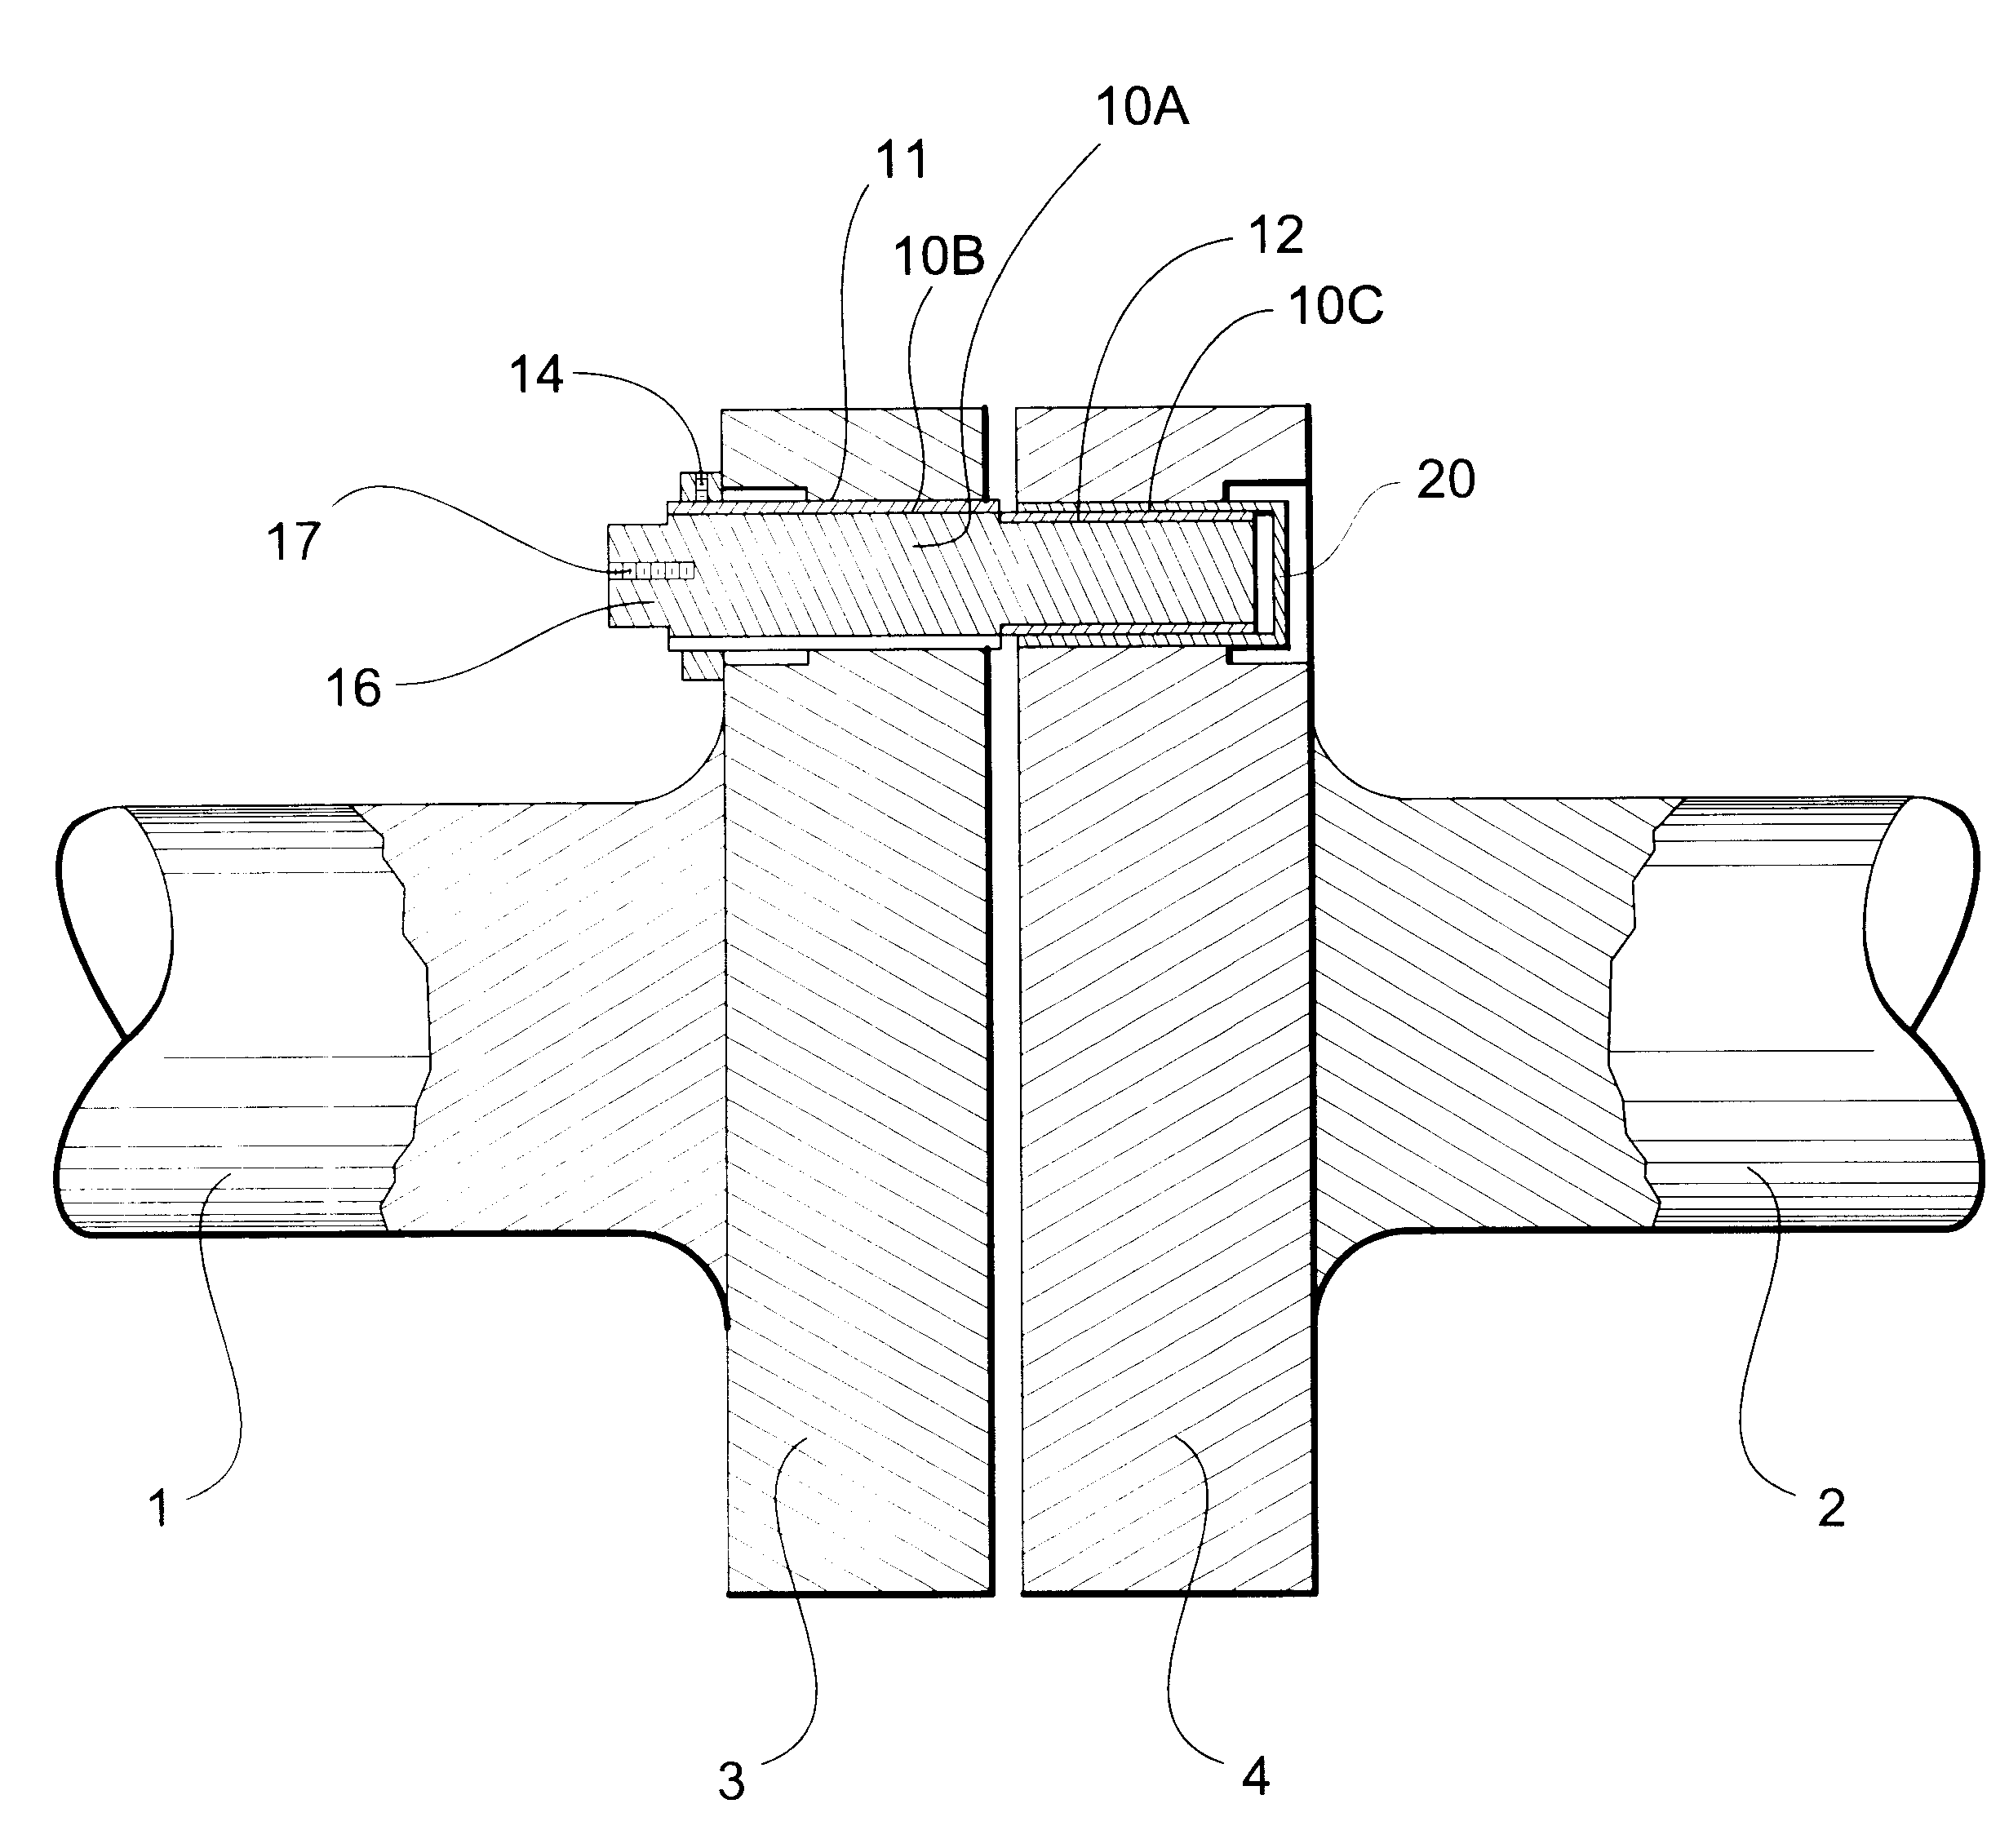 Apparatus and method for aligning shaft couplings